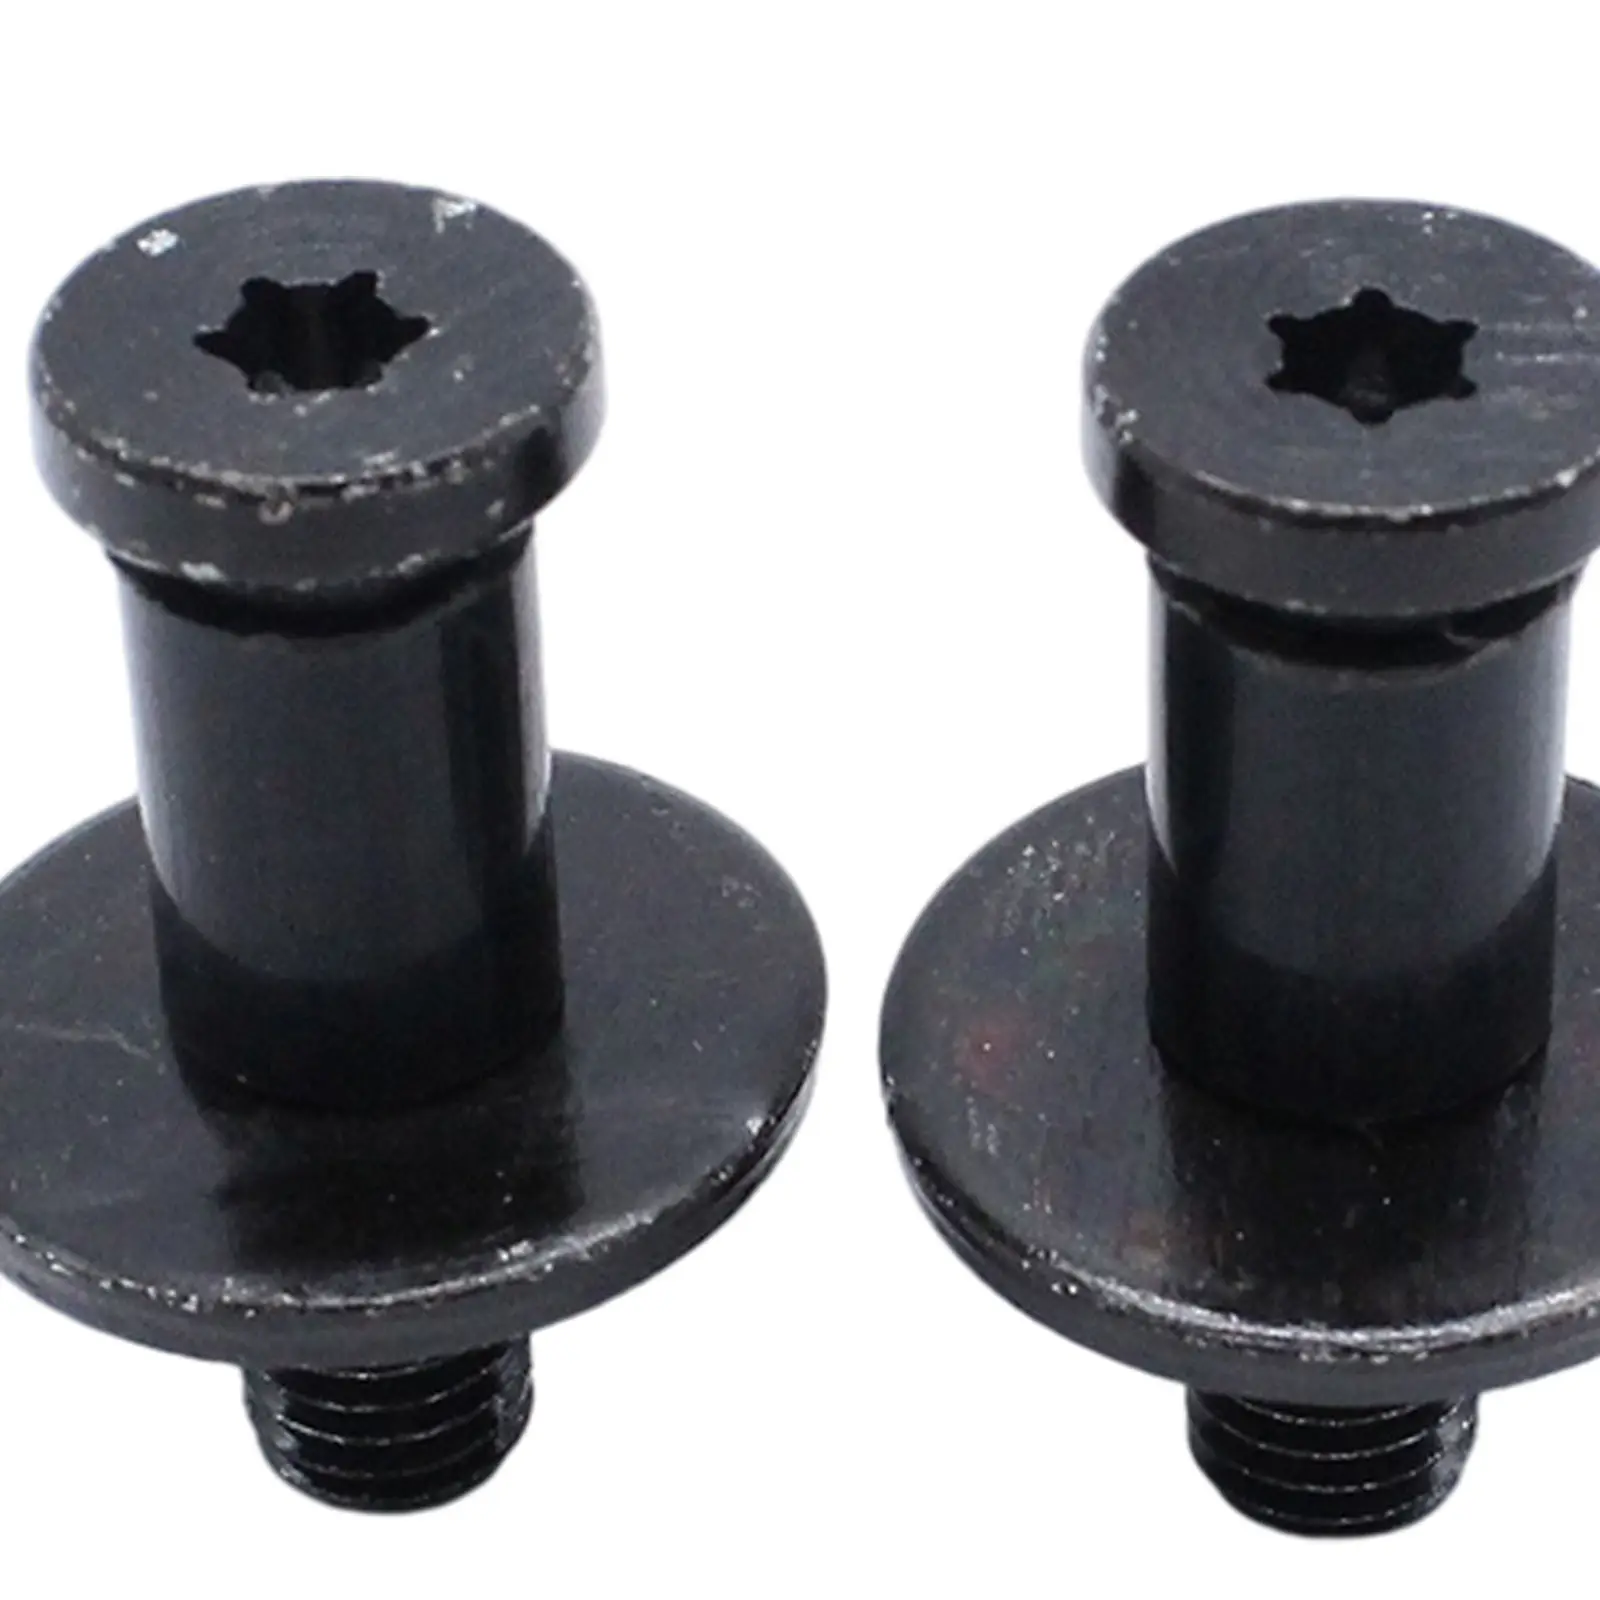 2 Pieces Tailgate Striker Bolt 38427 Set of 2 with Nuts Pair Replace Door Latch Fit for GMC Sierra Chevrolet Avalanche